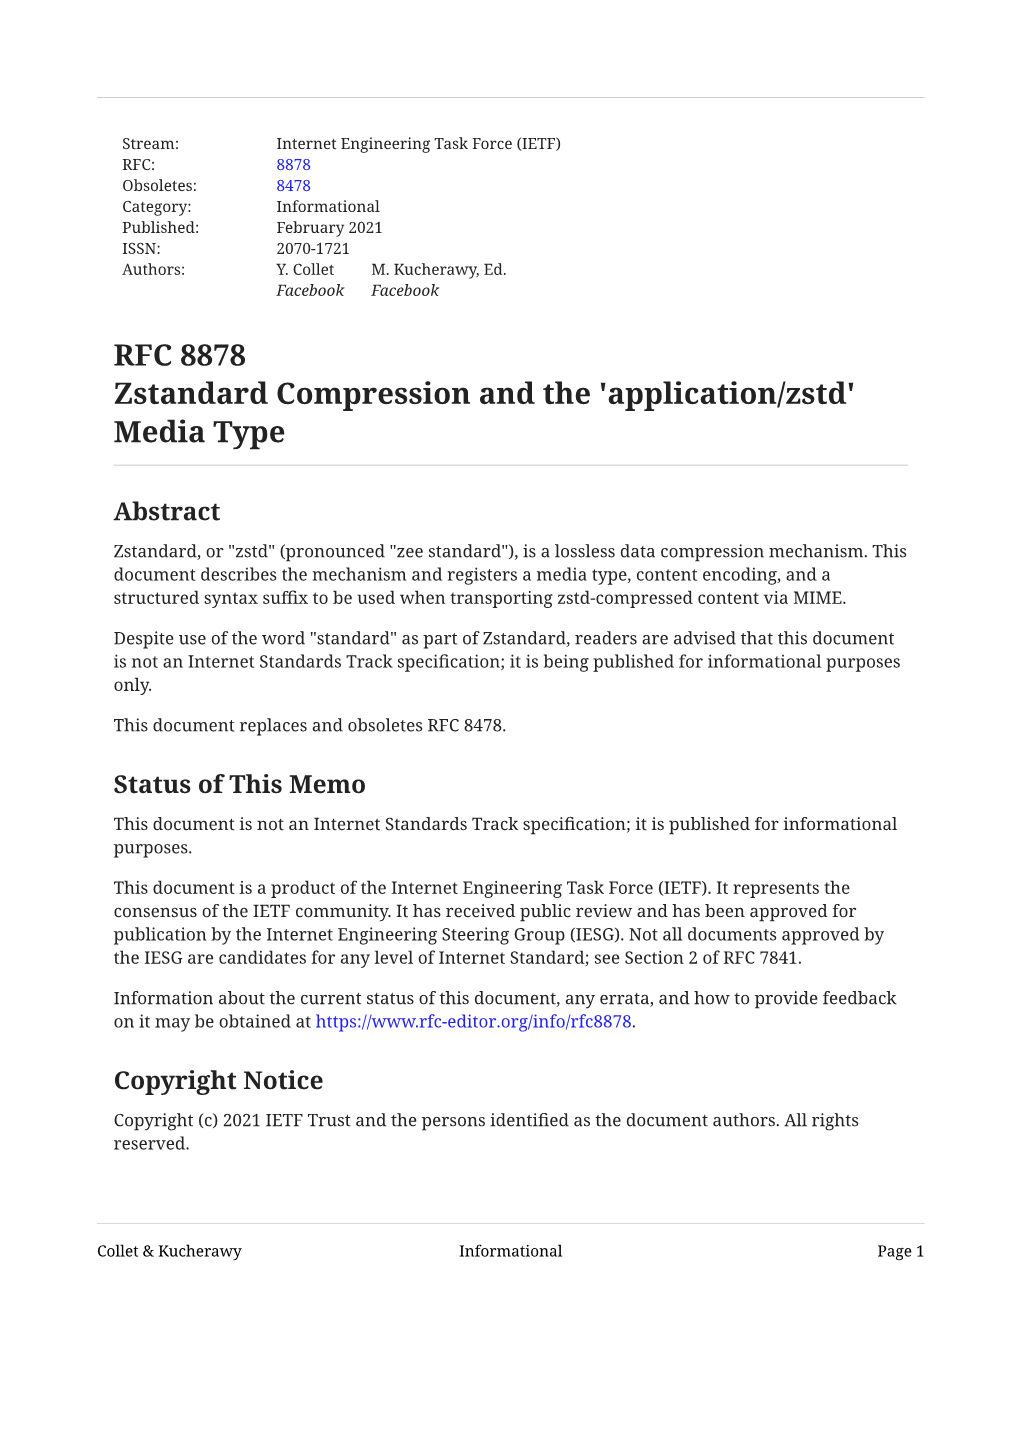 RFC 8878: Zstandard Compression and the 'Application/Zstd'